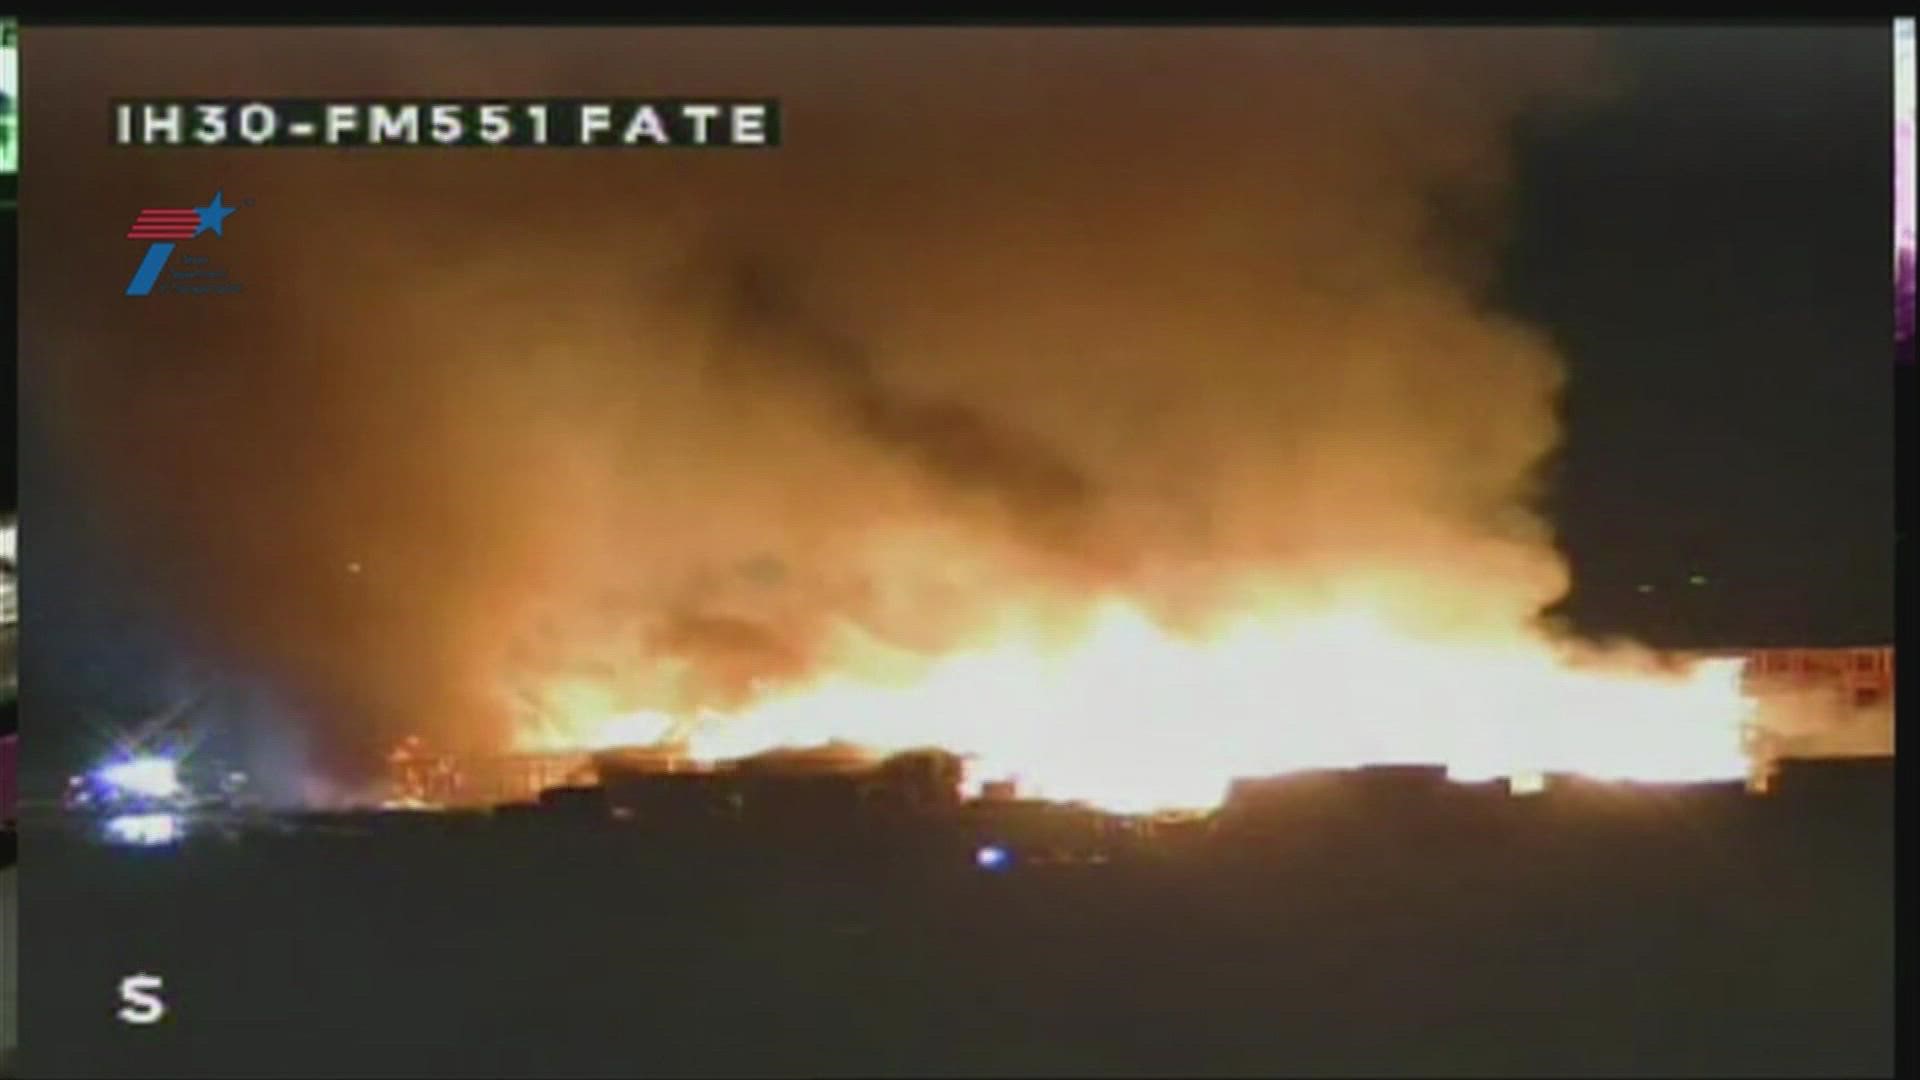 Texas Department of Transportation cameras at I-30 and Farm Road 551 in Fate showed a large, active fire that was burning what appeared to be a structure.